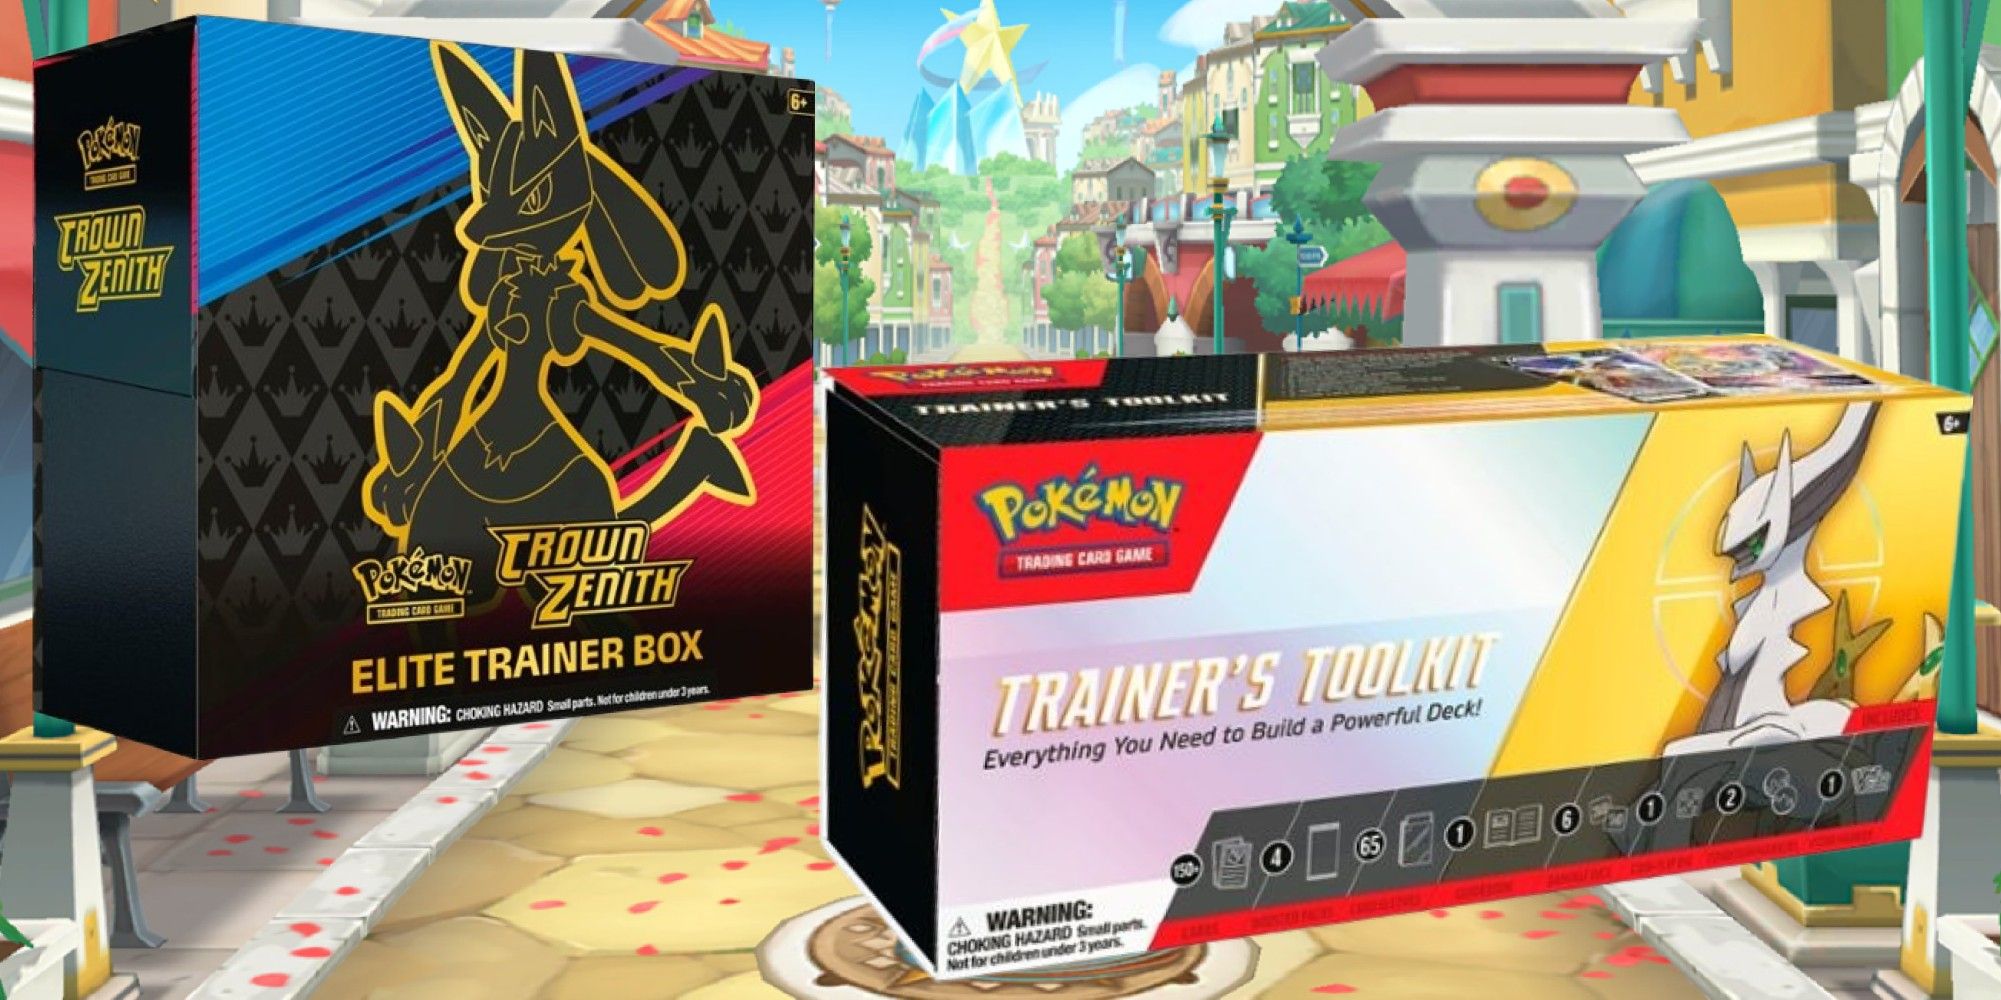 Early Black Friday: Pokemon TCG Sets Are On Sale Right Now - IGN